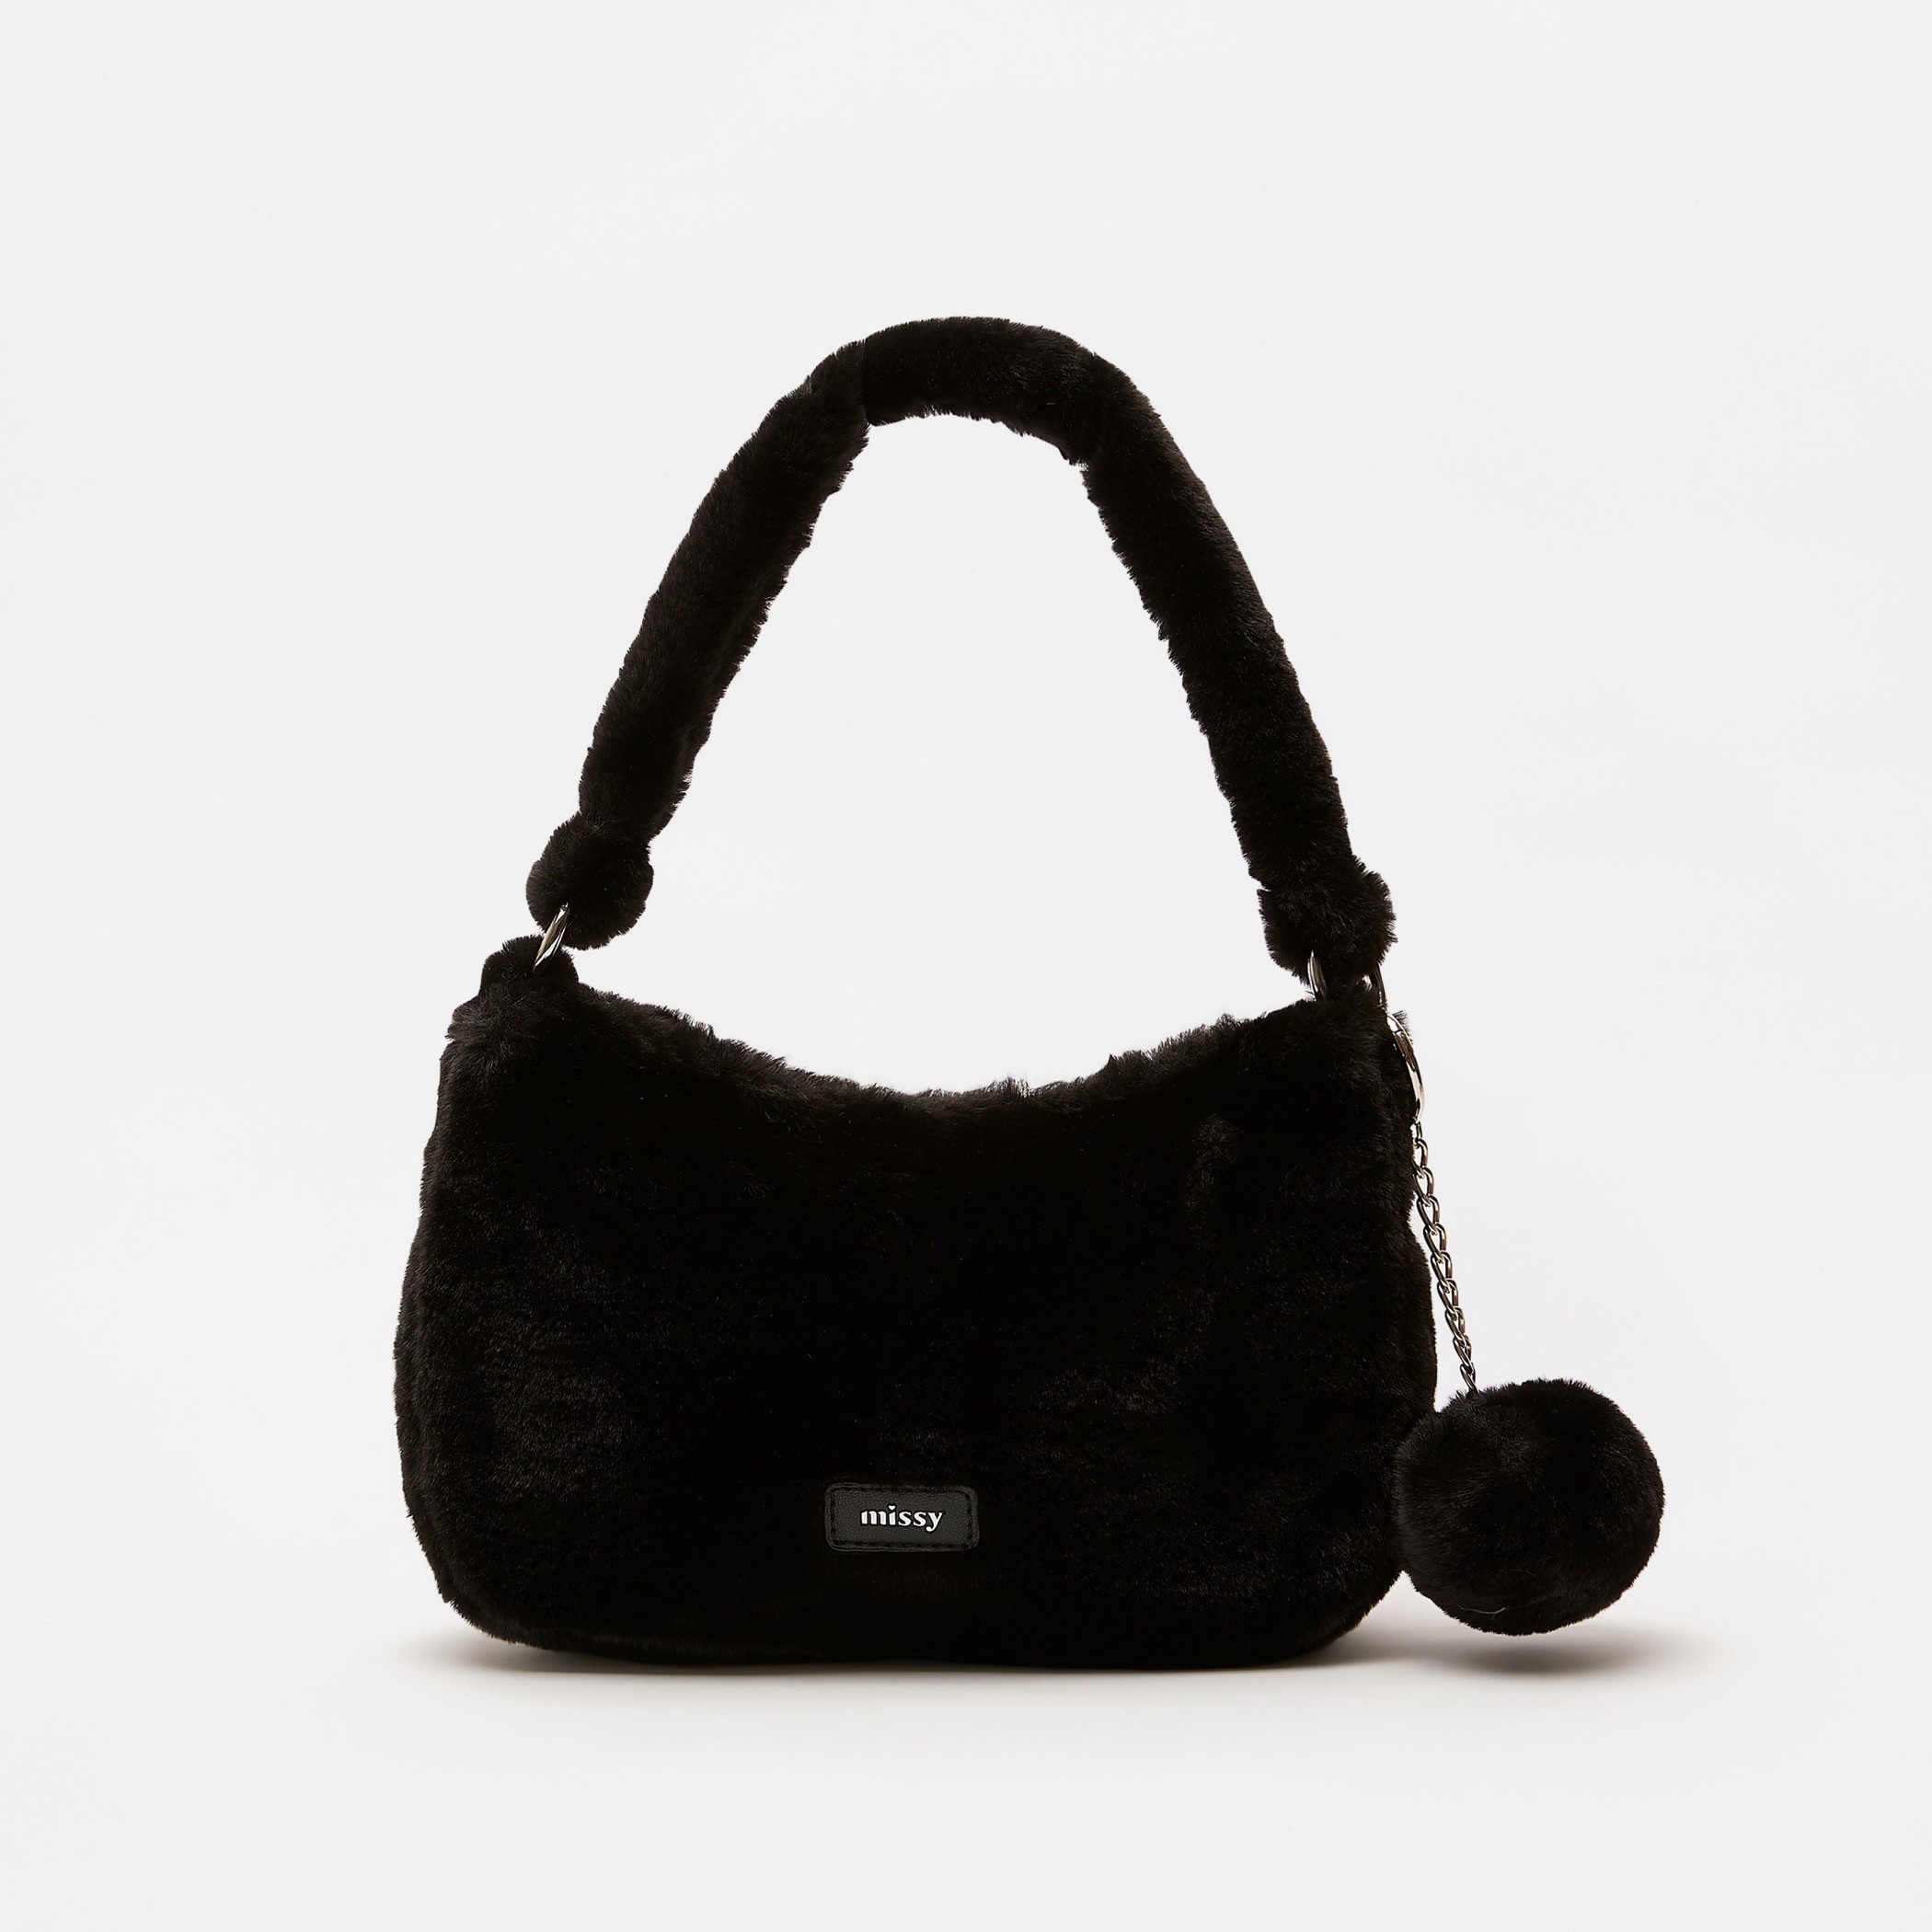 Classy Missy Collection | Sixtease Bags